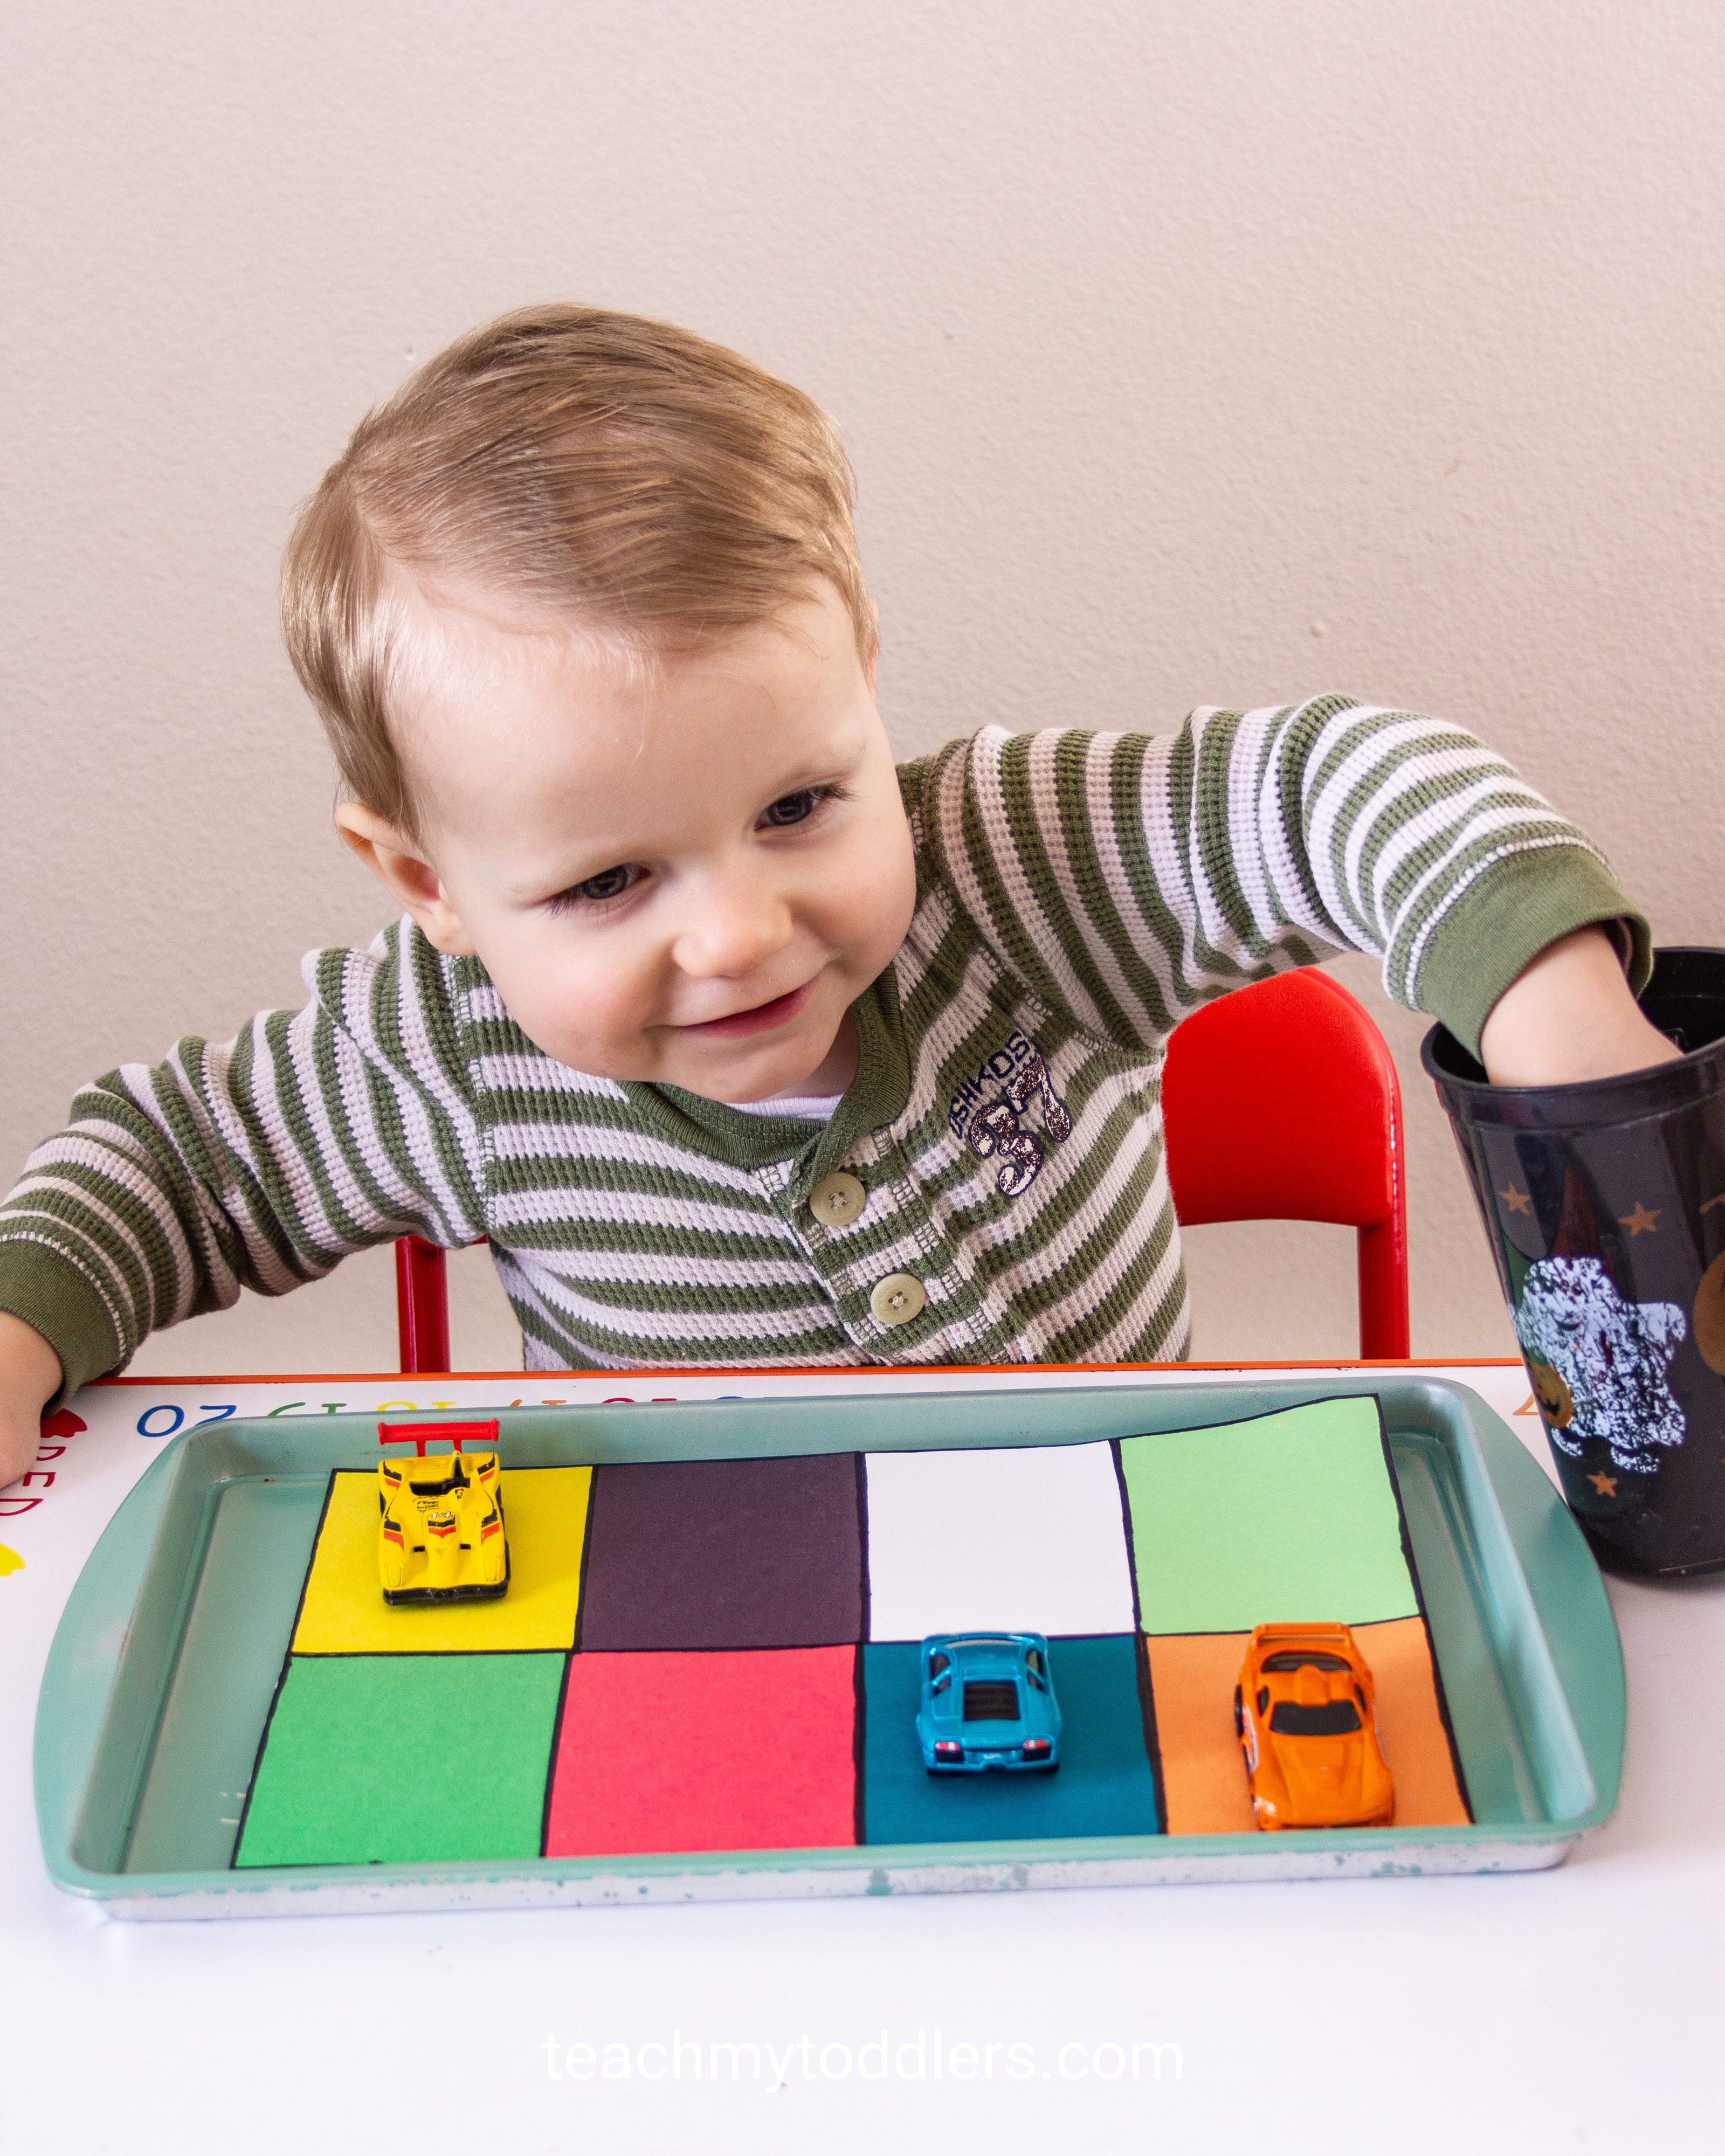 Use these awesome car activities to teach toddlers about cars